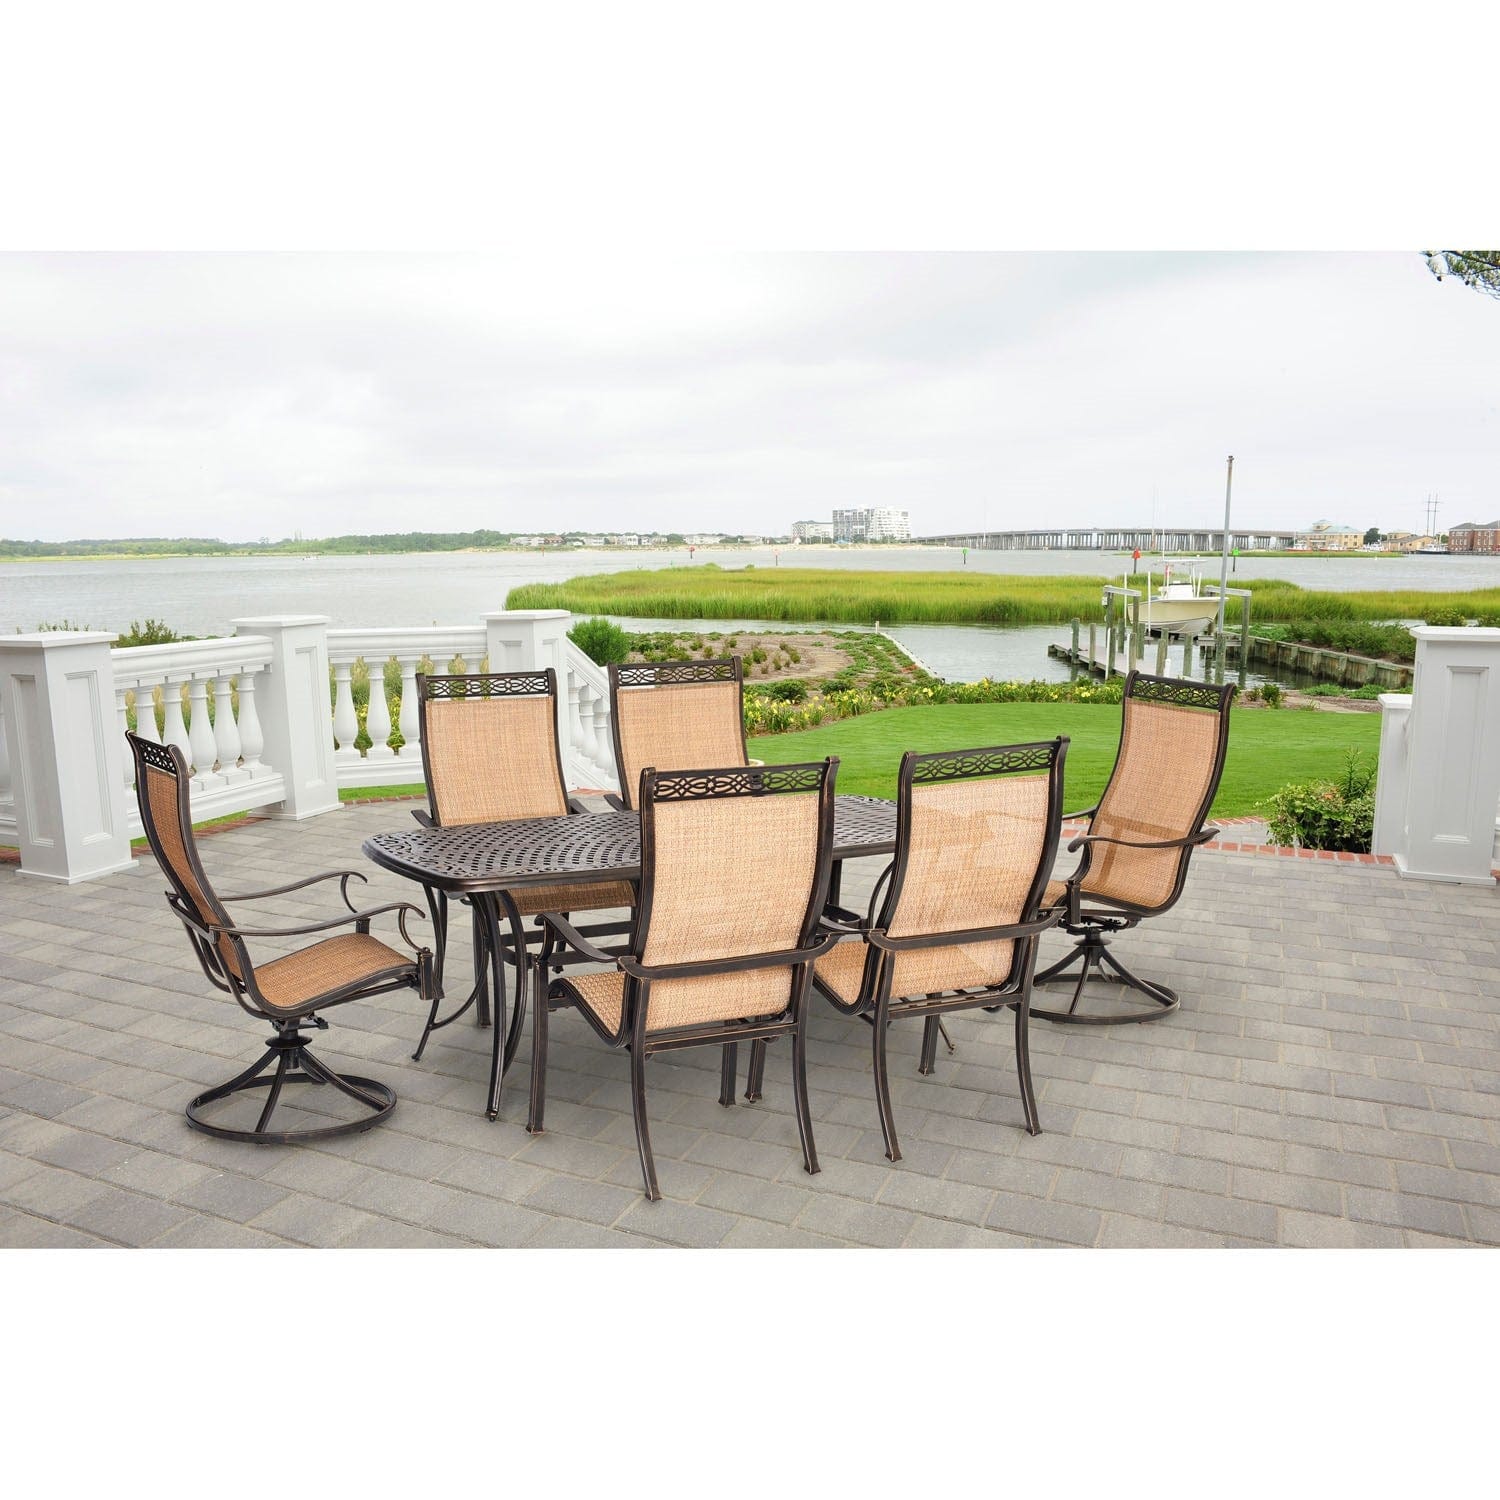 Hanover Outdoor Dining Set Hanover - Manor 7-Piece Outdoor Dining Set with Two Swivel Rockers MANDN7PCSW-2